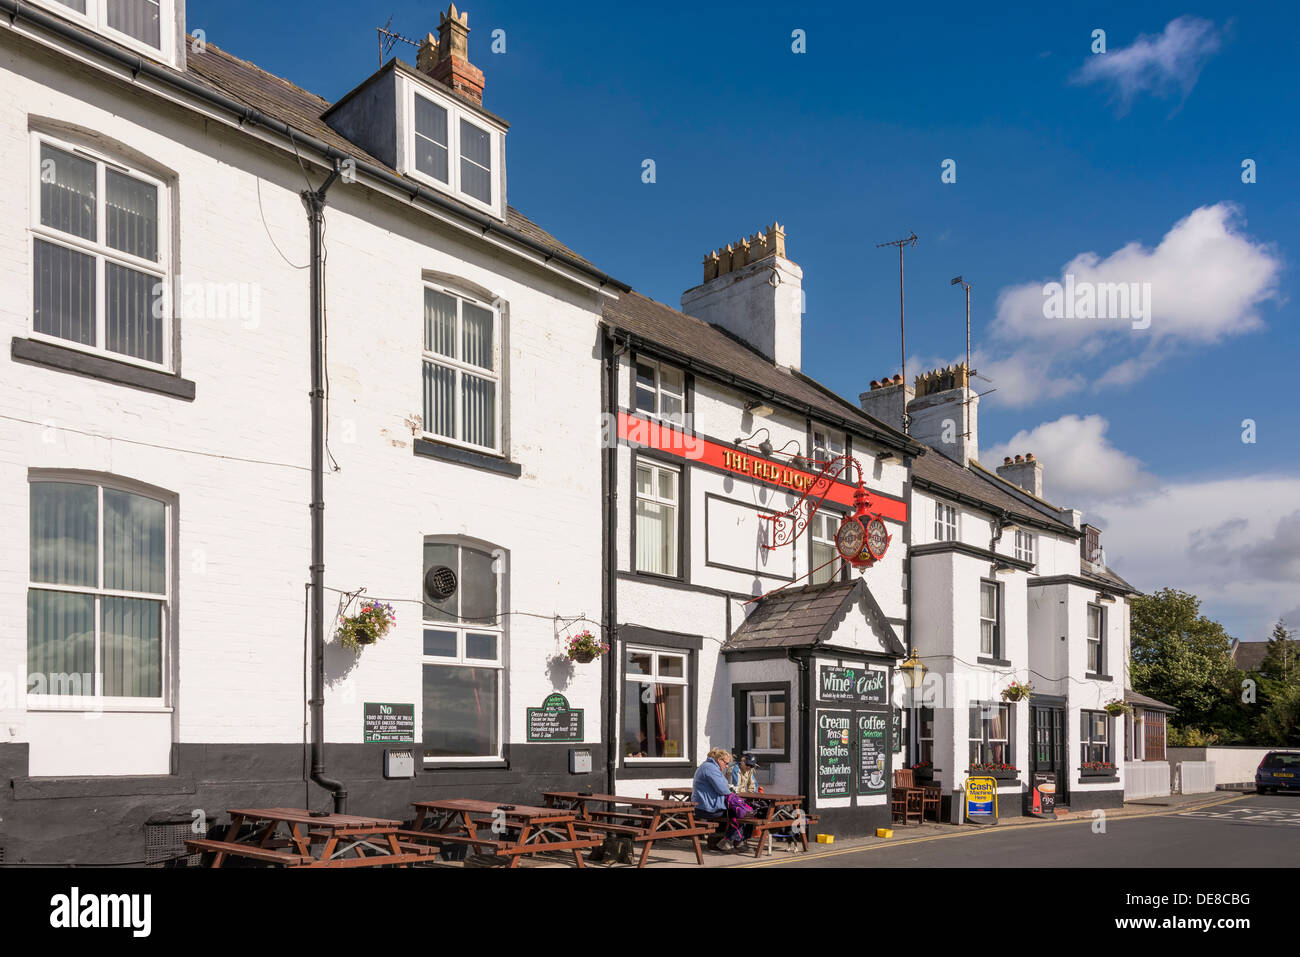 The seafront at Parkgate on the Wirral in Cheshire. Cheshire's only coastal resort. The public house the Red Lion. Stock Photo